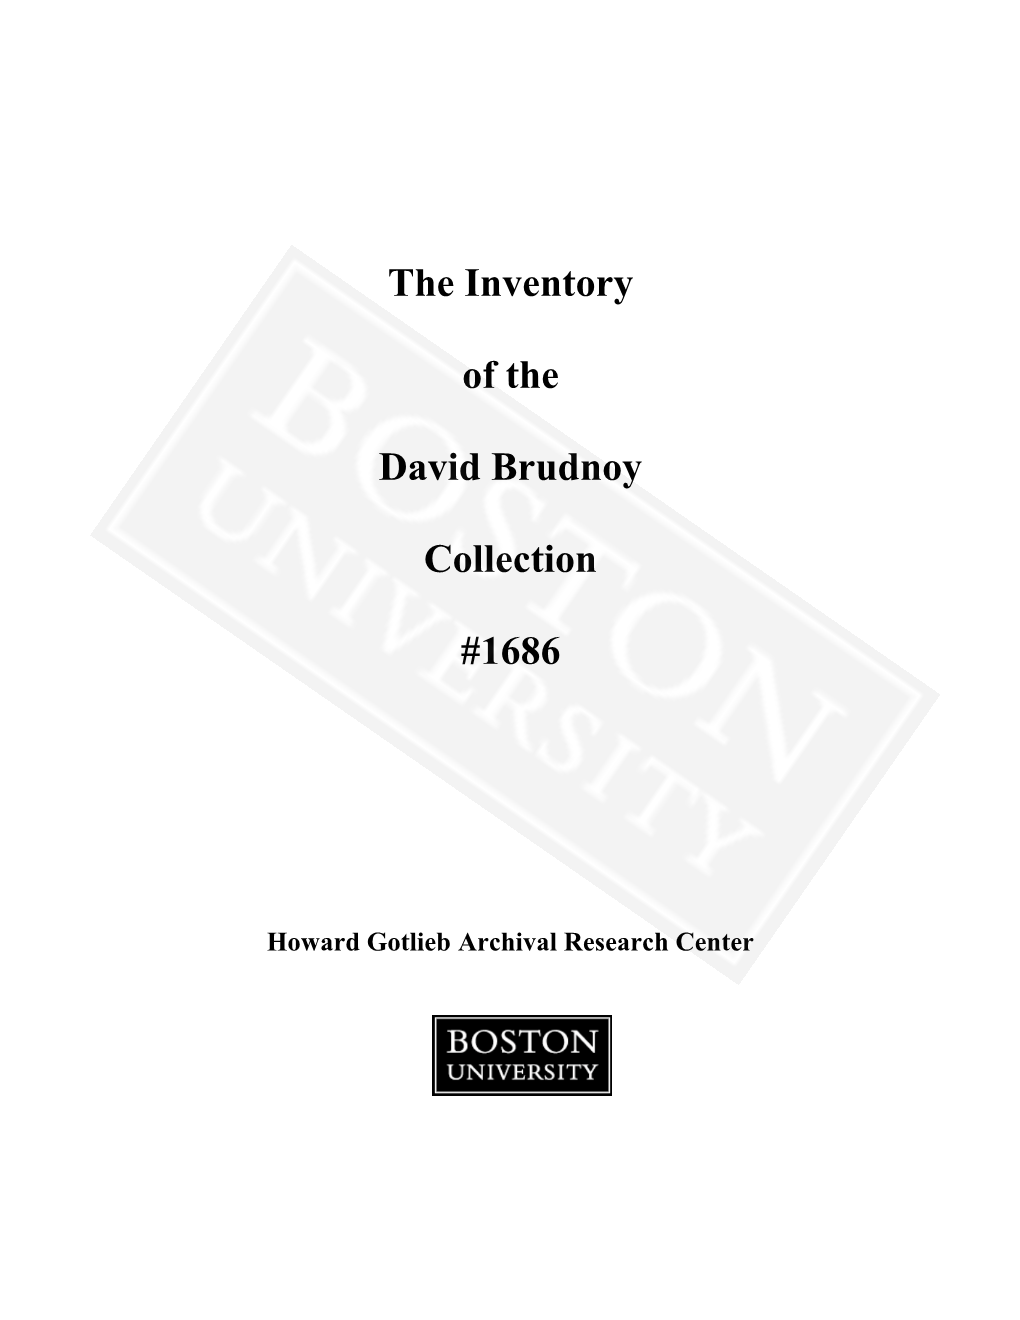 The Inventory of the David Brudnoy Collection #1686